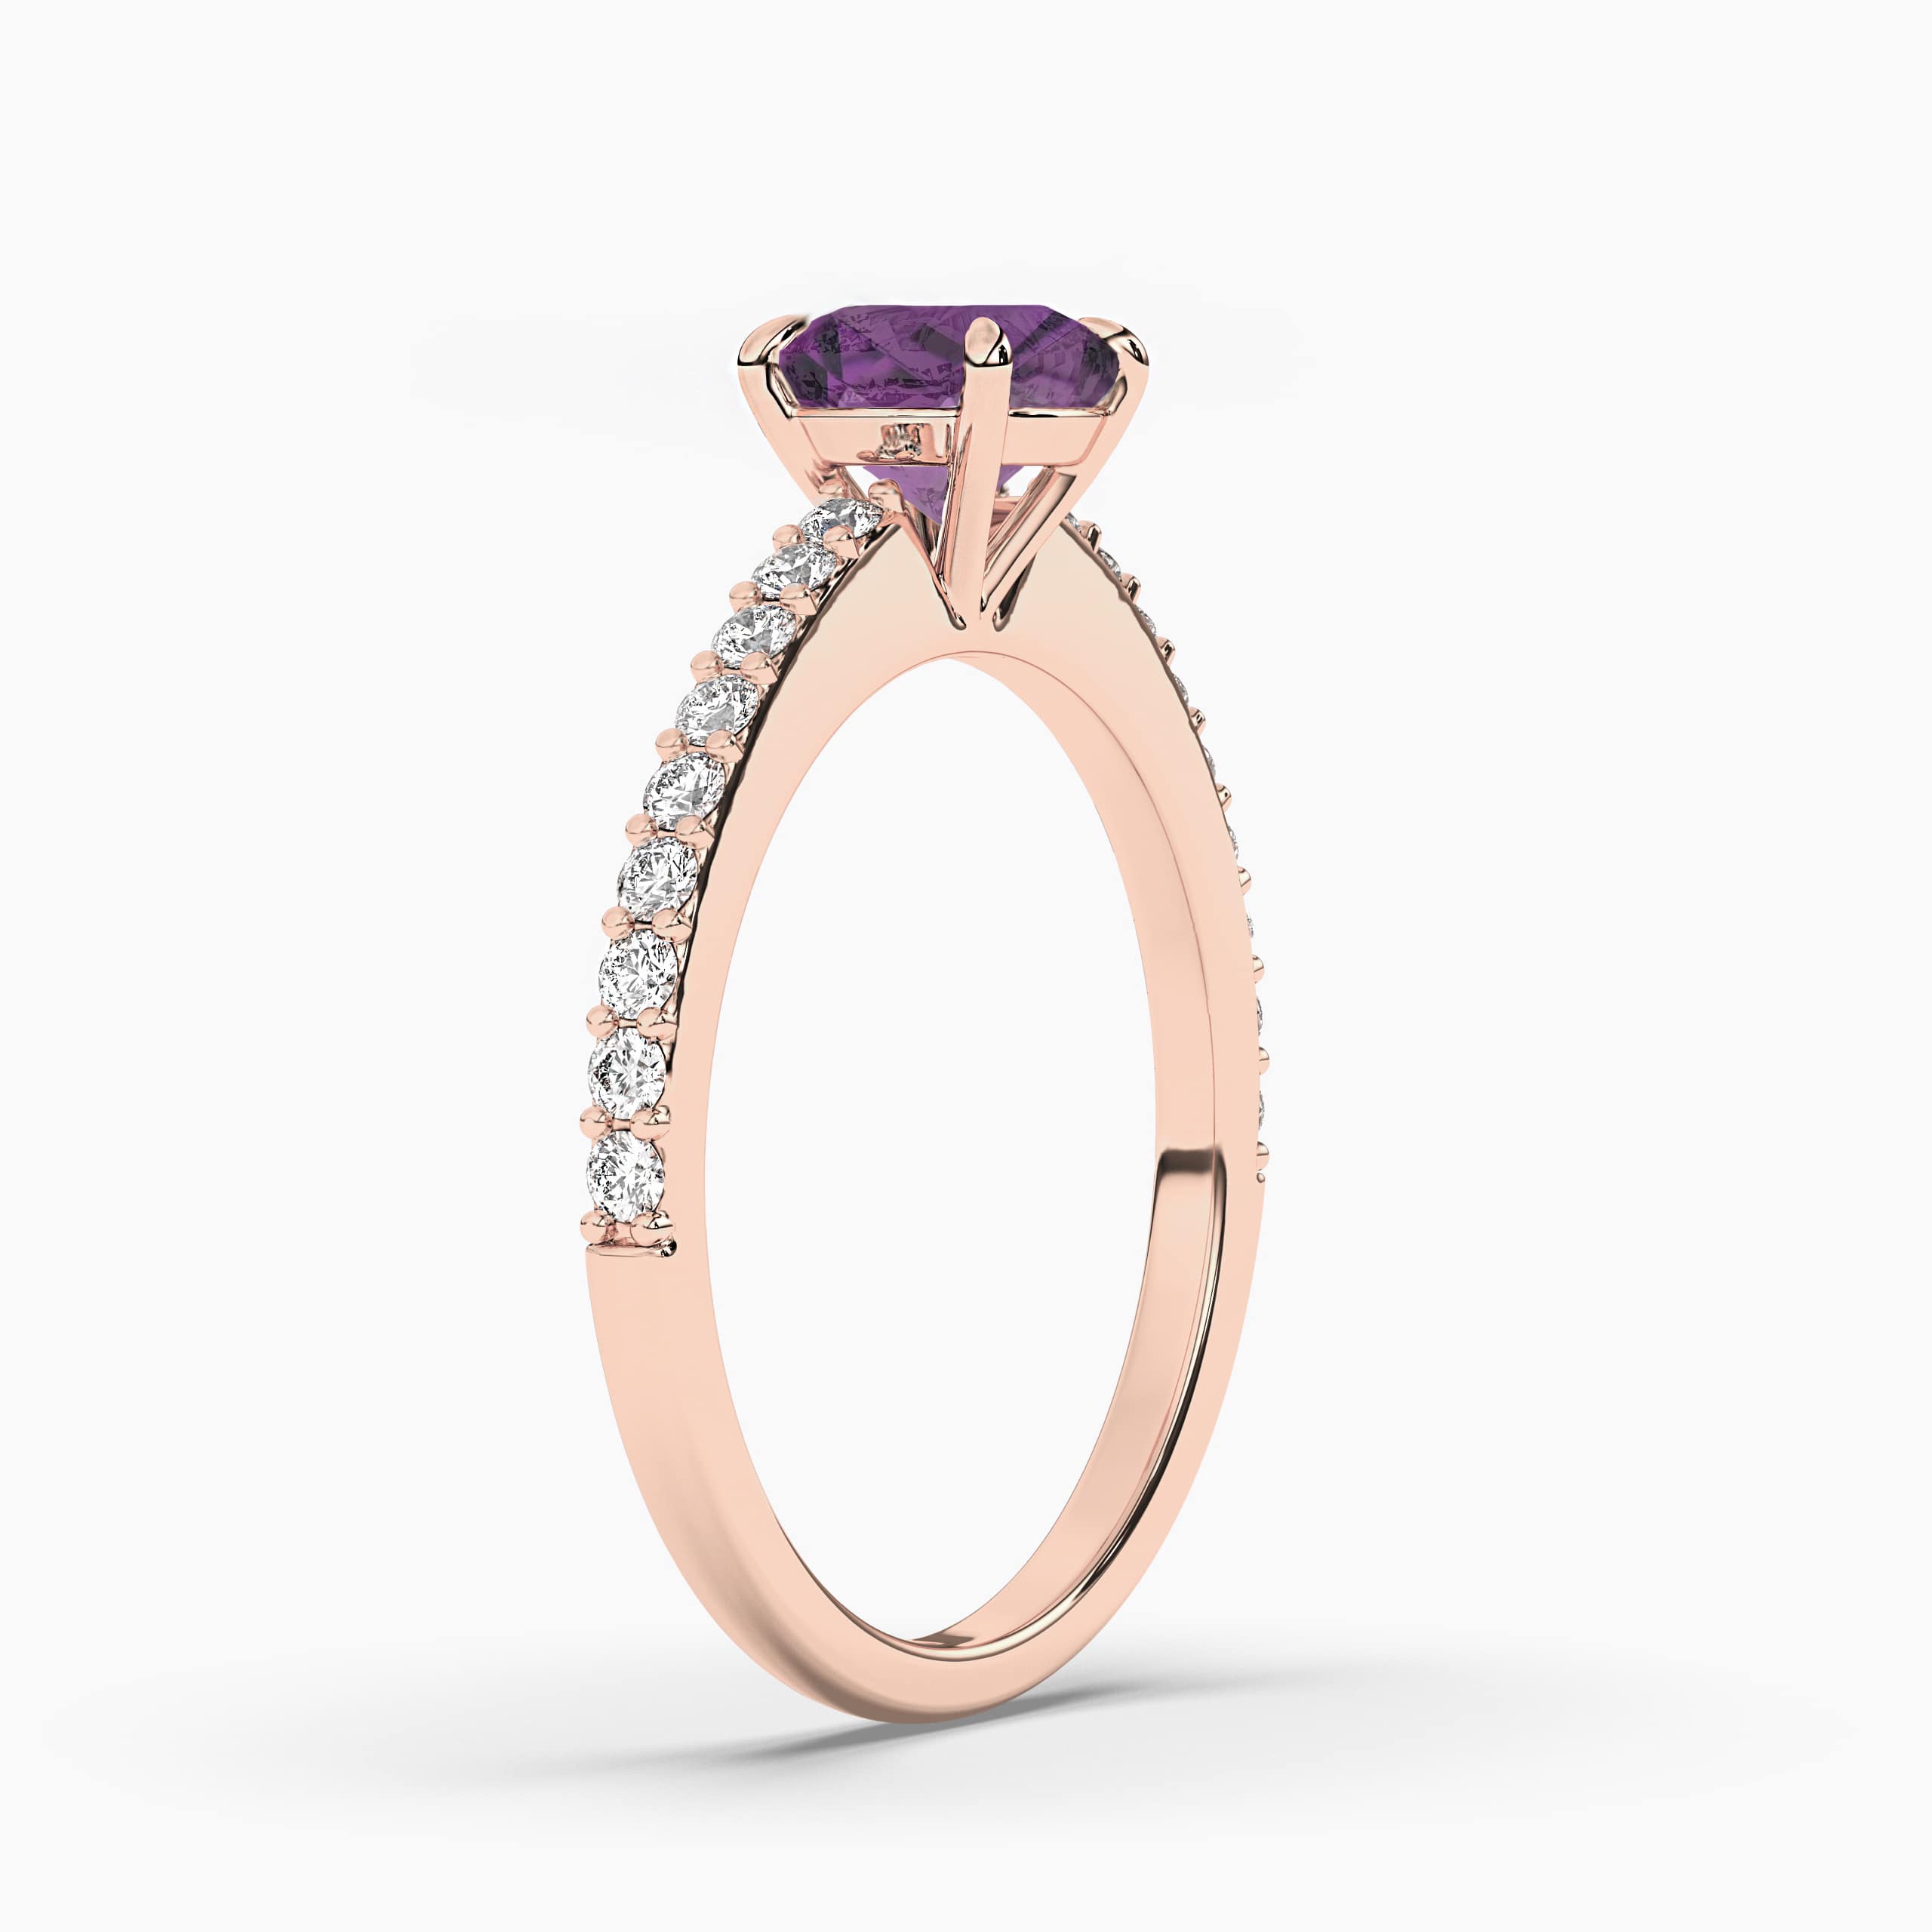 CUSHION CUT AMETHYST RING ROSE GOLD WITH DIAMONDS